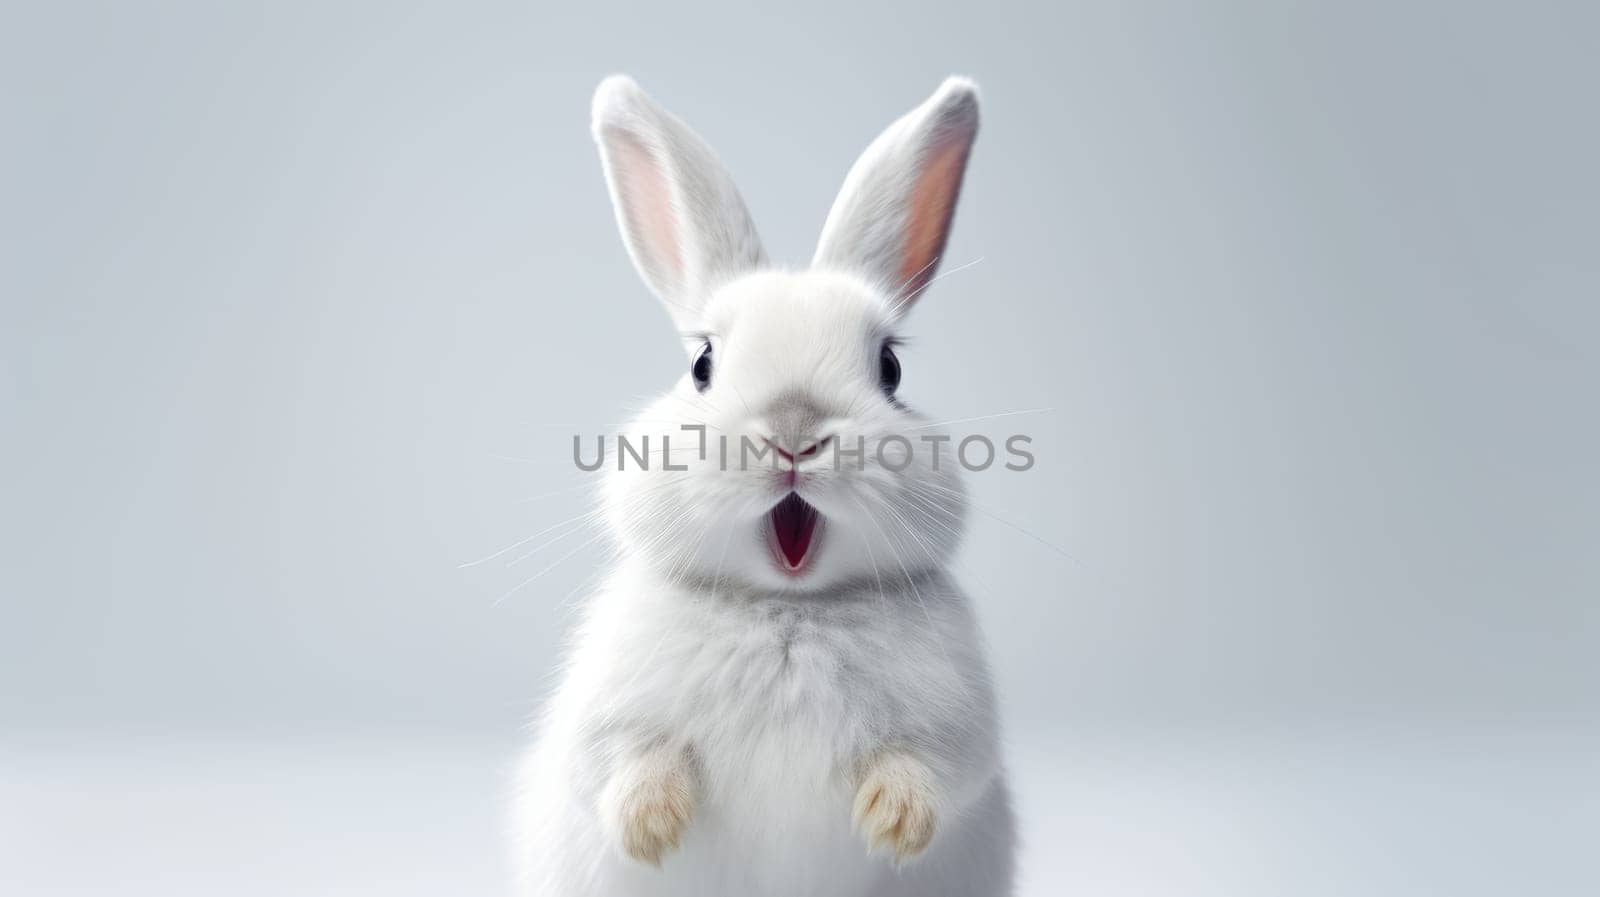 Surprised Funny Cute Bunny with Big Eyes on Light Background, Cute Animal Portrait by JuliaDorian